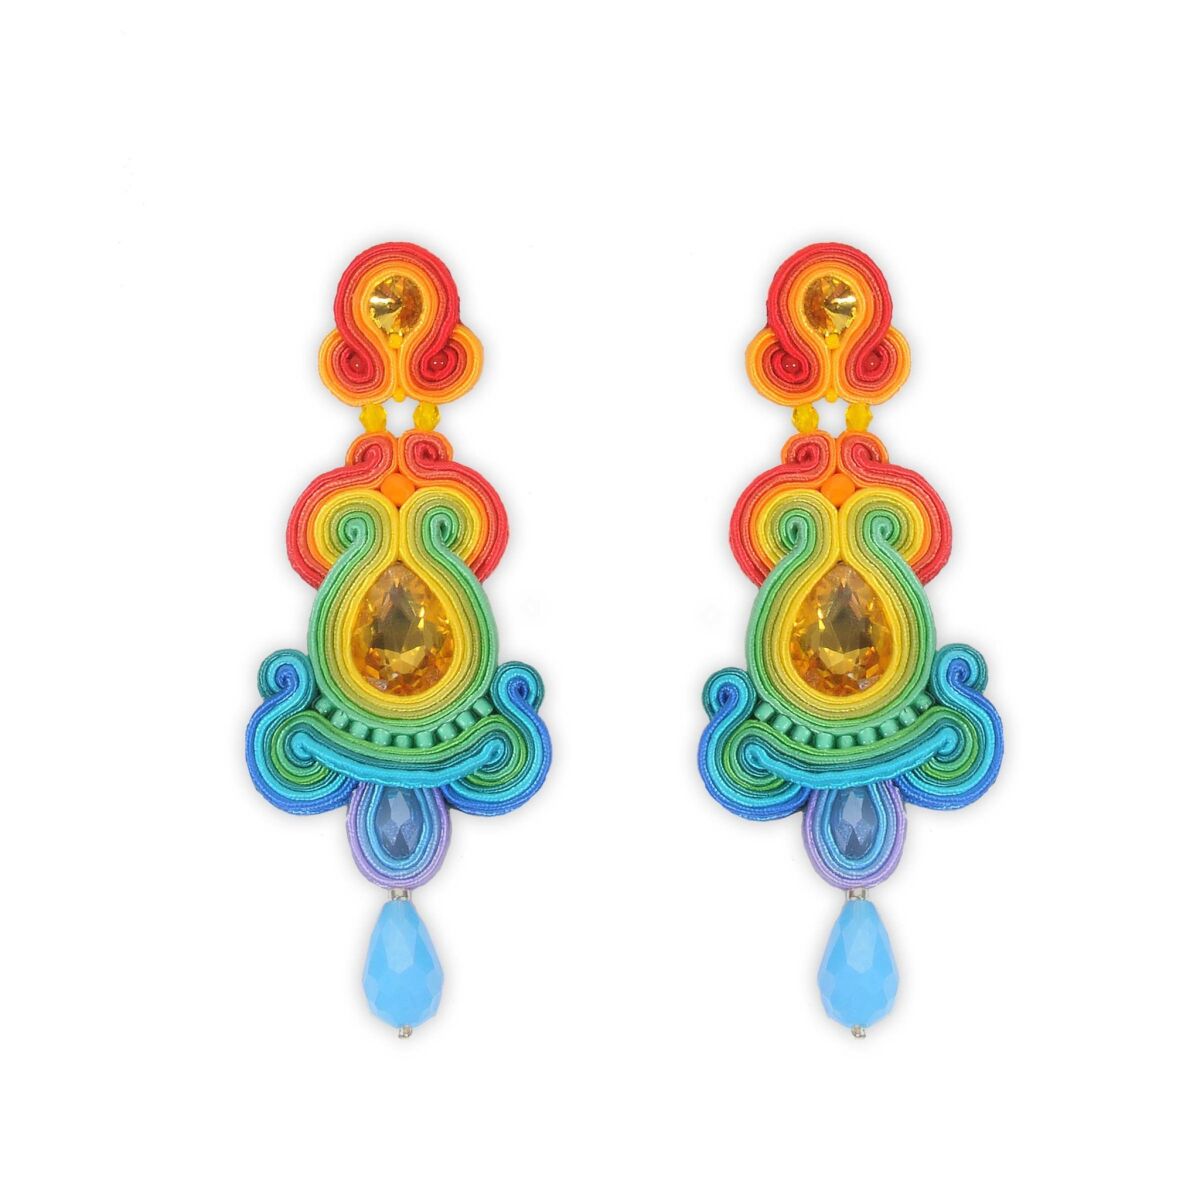 . Shown here are earrings from Cyprus, $208. (The Accessory Junkie)